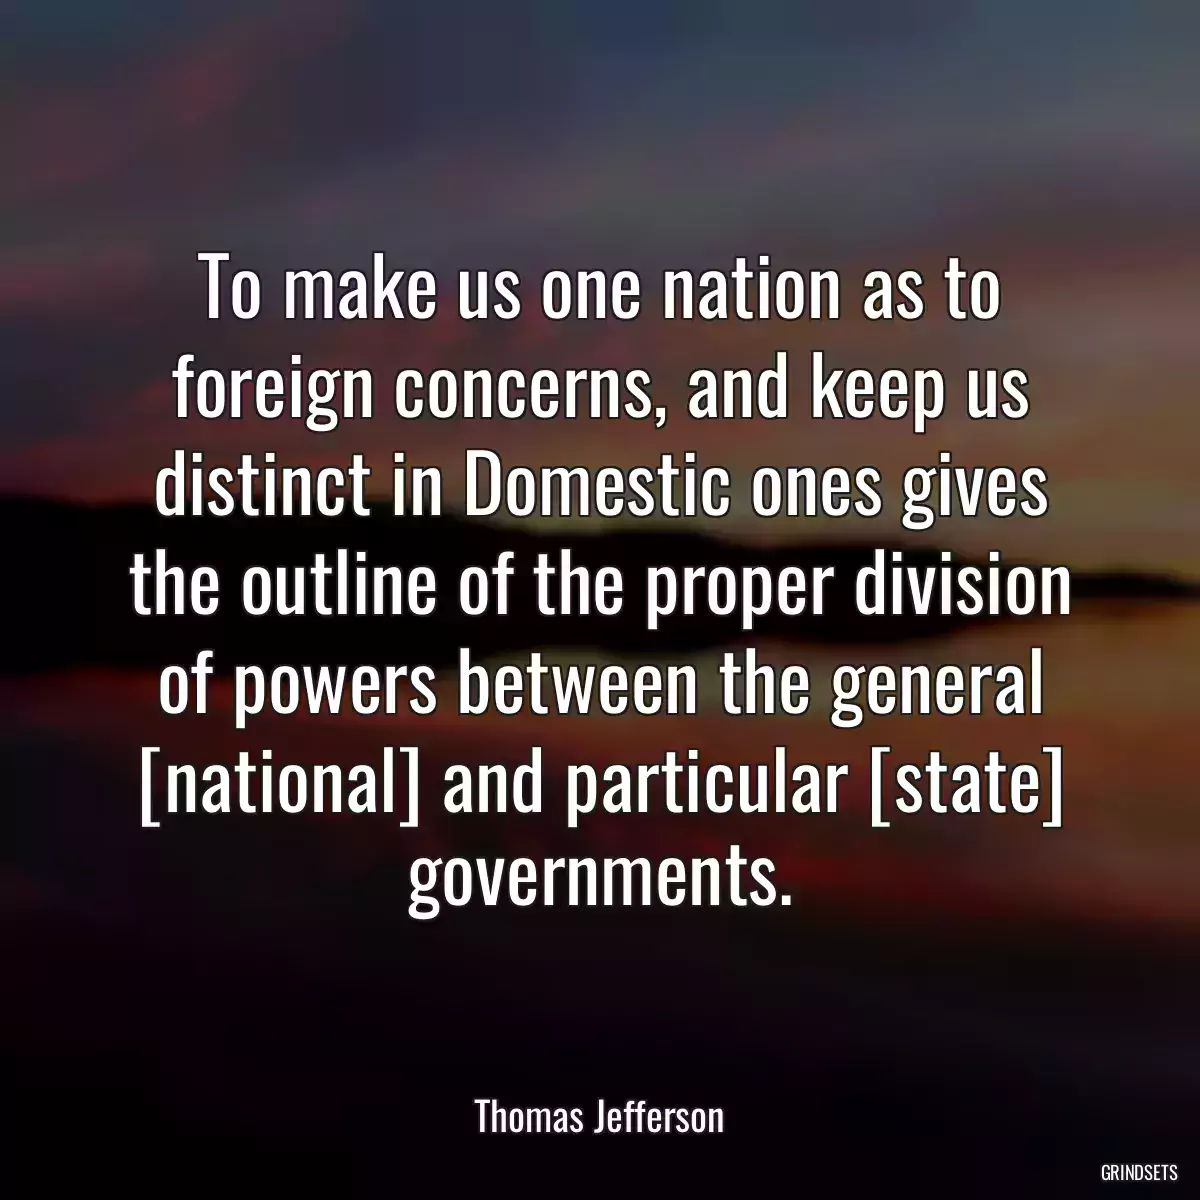 To make us one nation as to foreign concerns, and keep us distinct in Domestic ones gives the outline of the proper division of powers between the general [national] and particular [state] governments.